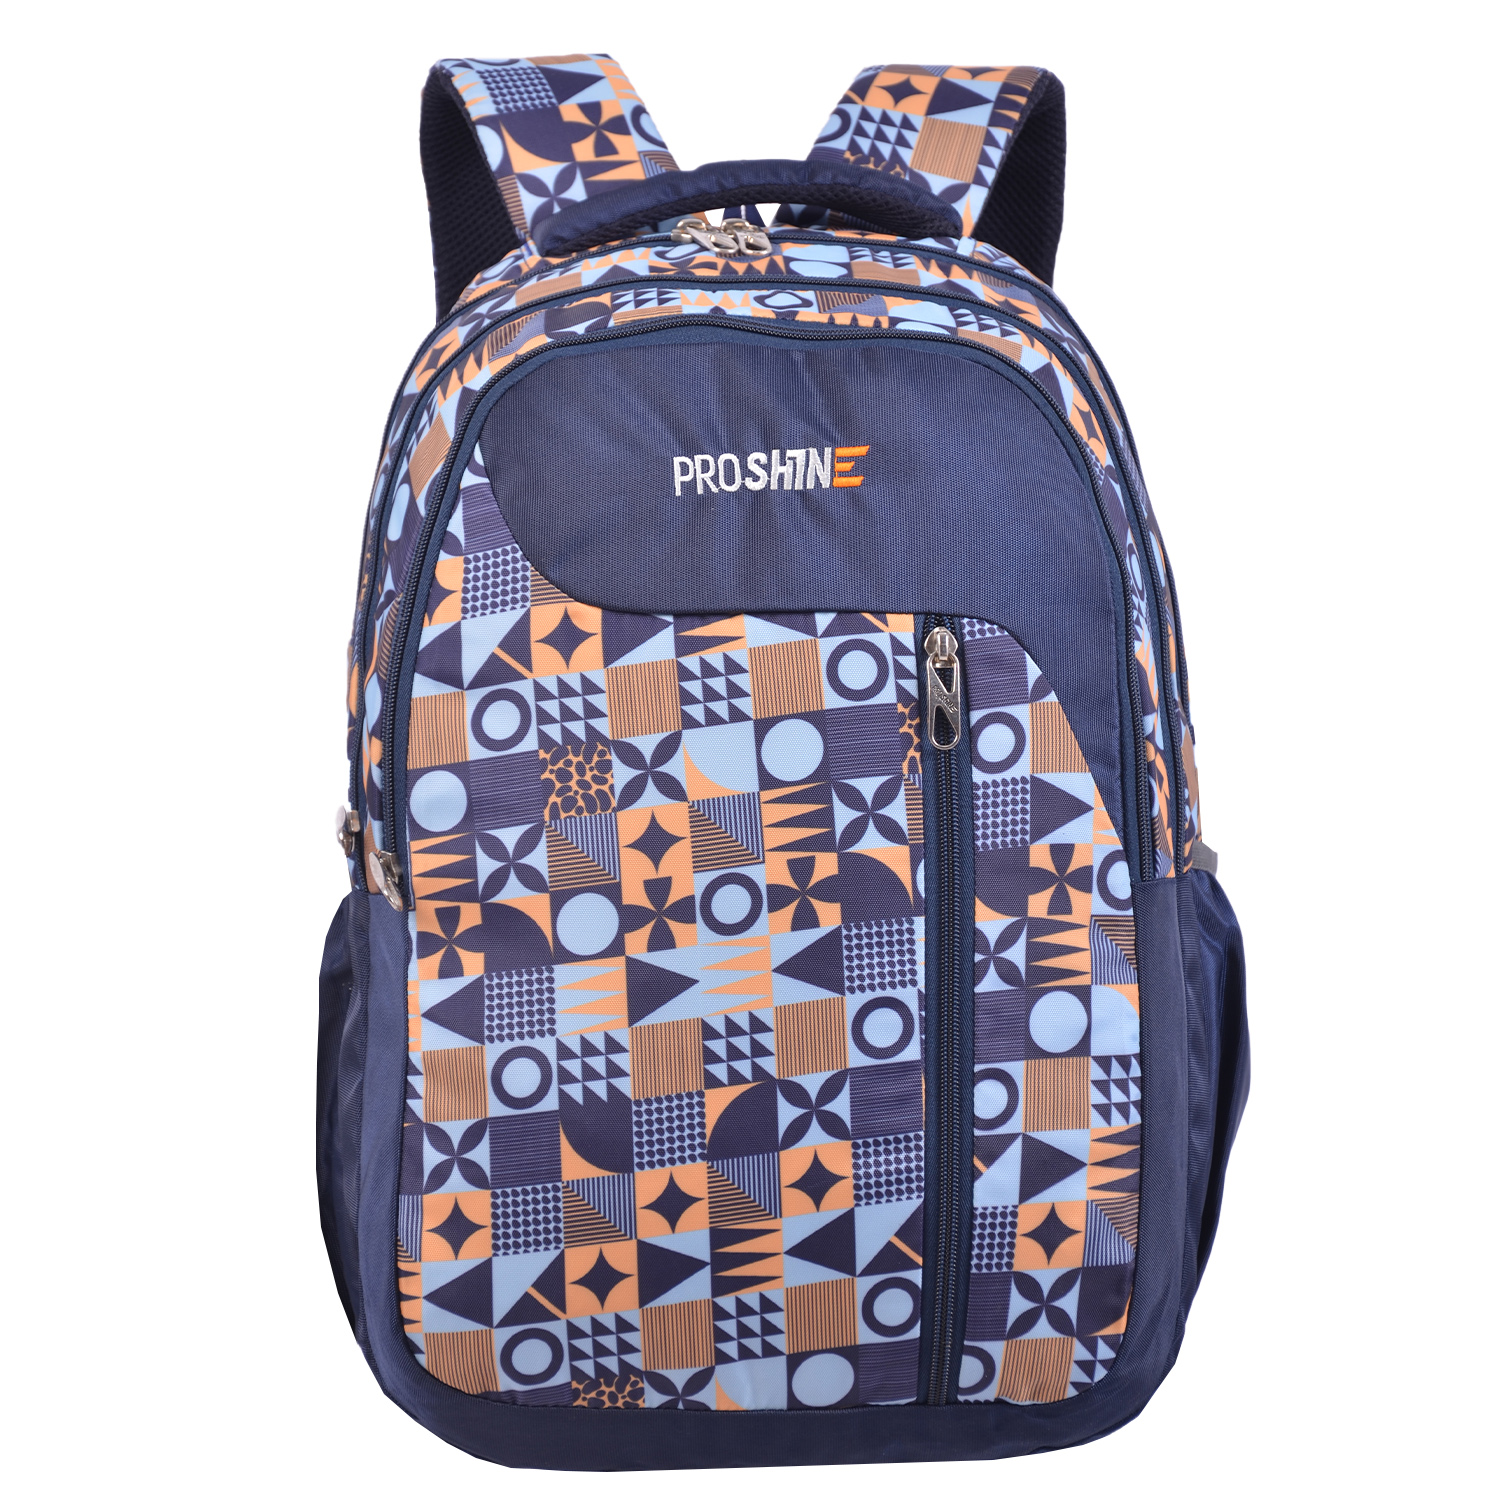 RoshanBags_PROSHINE 38L CASUAL BACKPACK A0399 NAVY BLUE